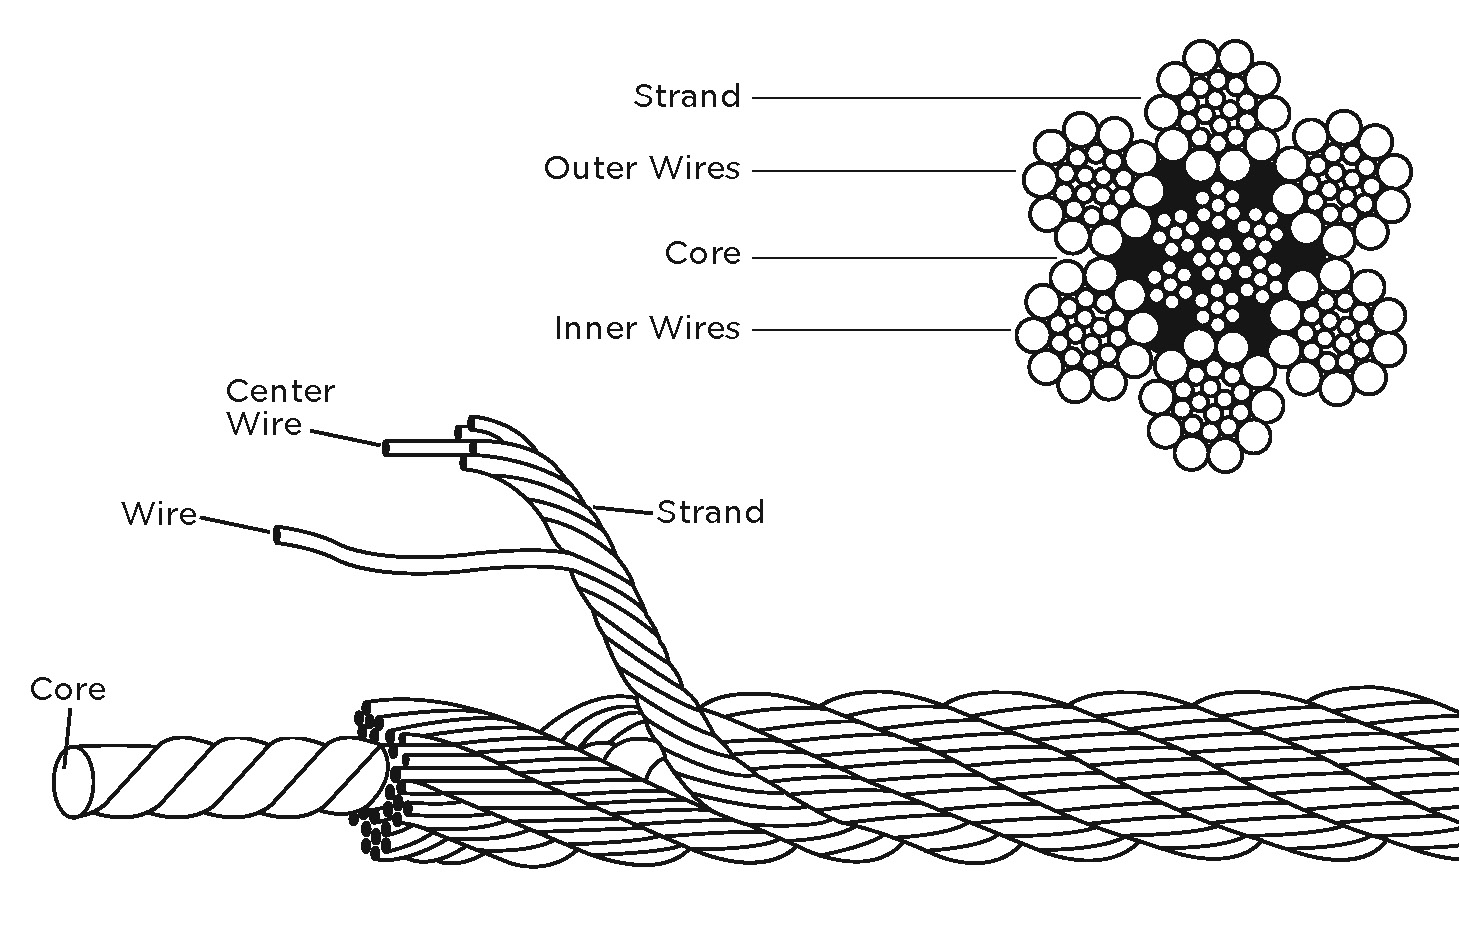 Which construction of wire rope do I need?